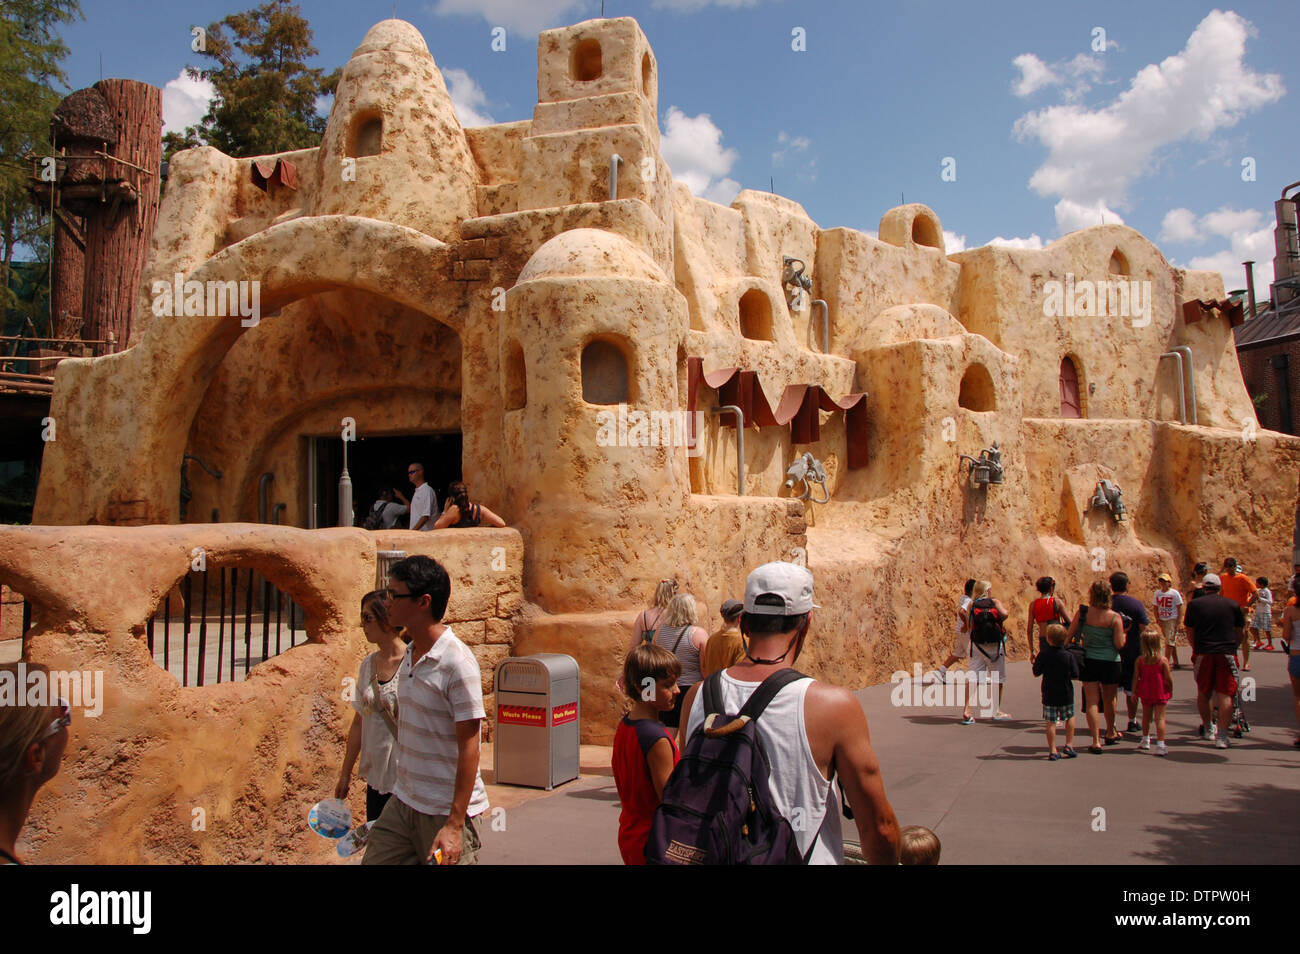 Huge brown stone effect castle at the Walt Disney's Hollywood Studios in Orlando, Florida, U.S.A Stock Photo